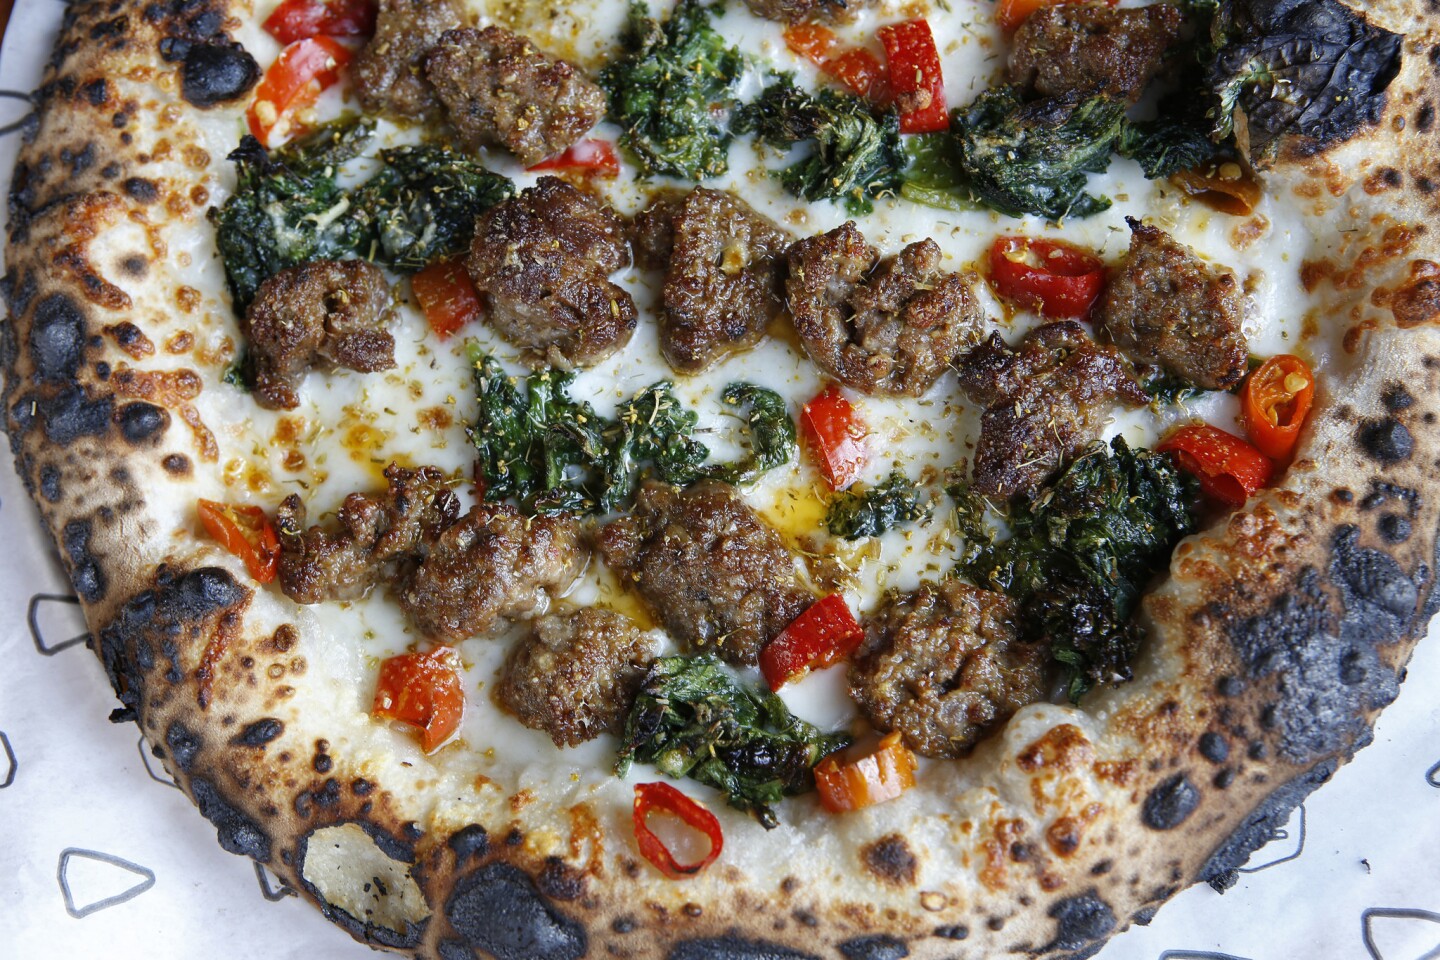 Sausage pizza with mustard greens at Cosa Buona in Echo Park.